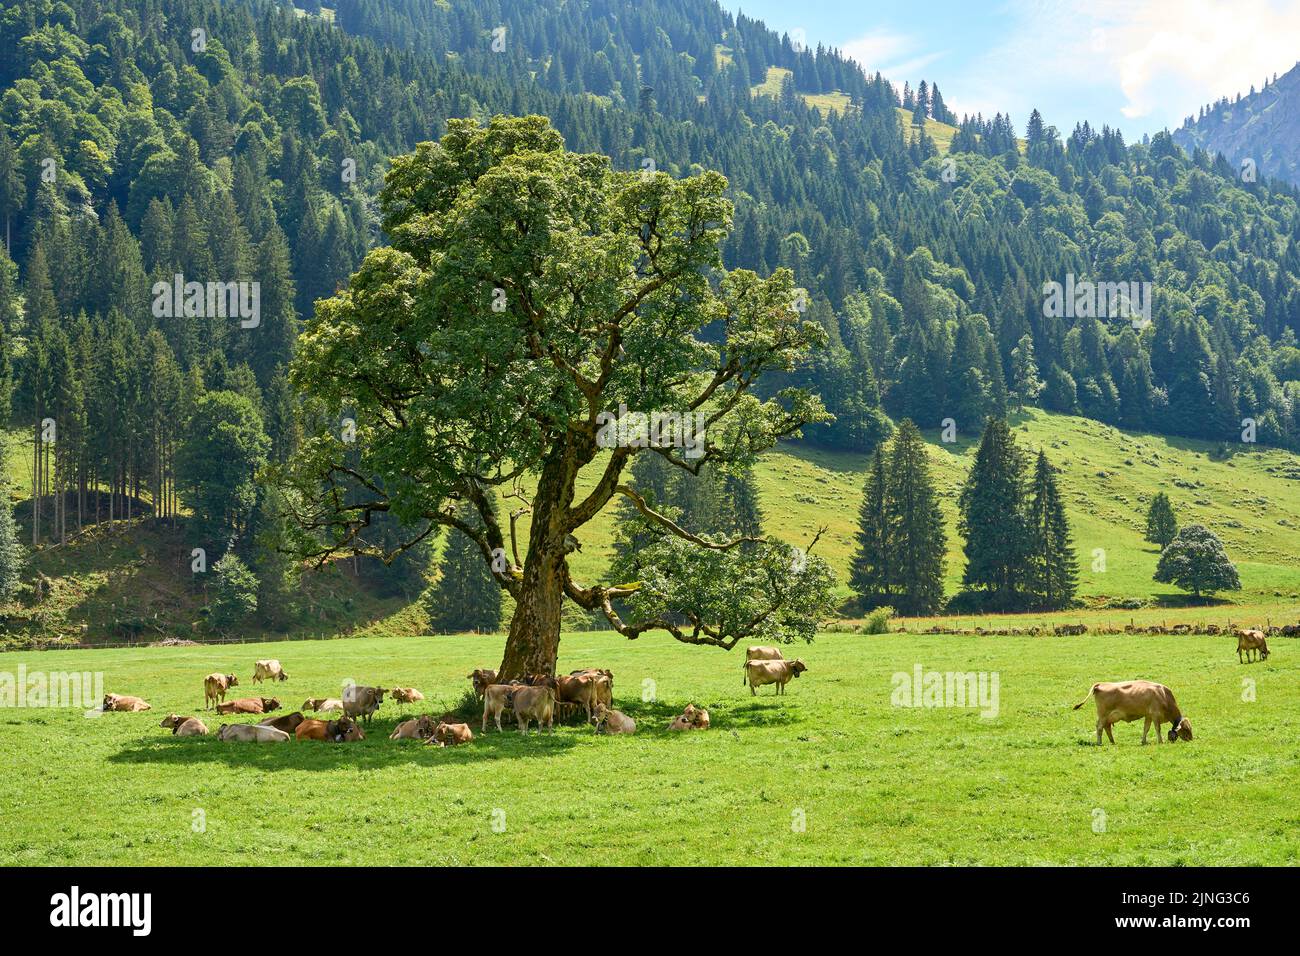 cattle herd on a pasture with an old mountain maple tree in the Gunzesried valley, Allgaeu Alps, Bavaria, Germany Stock Photo